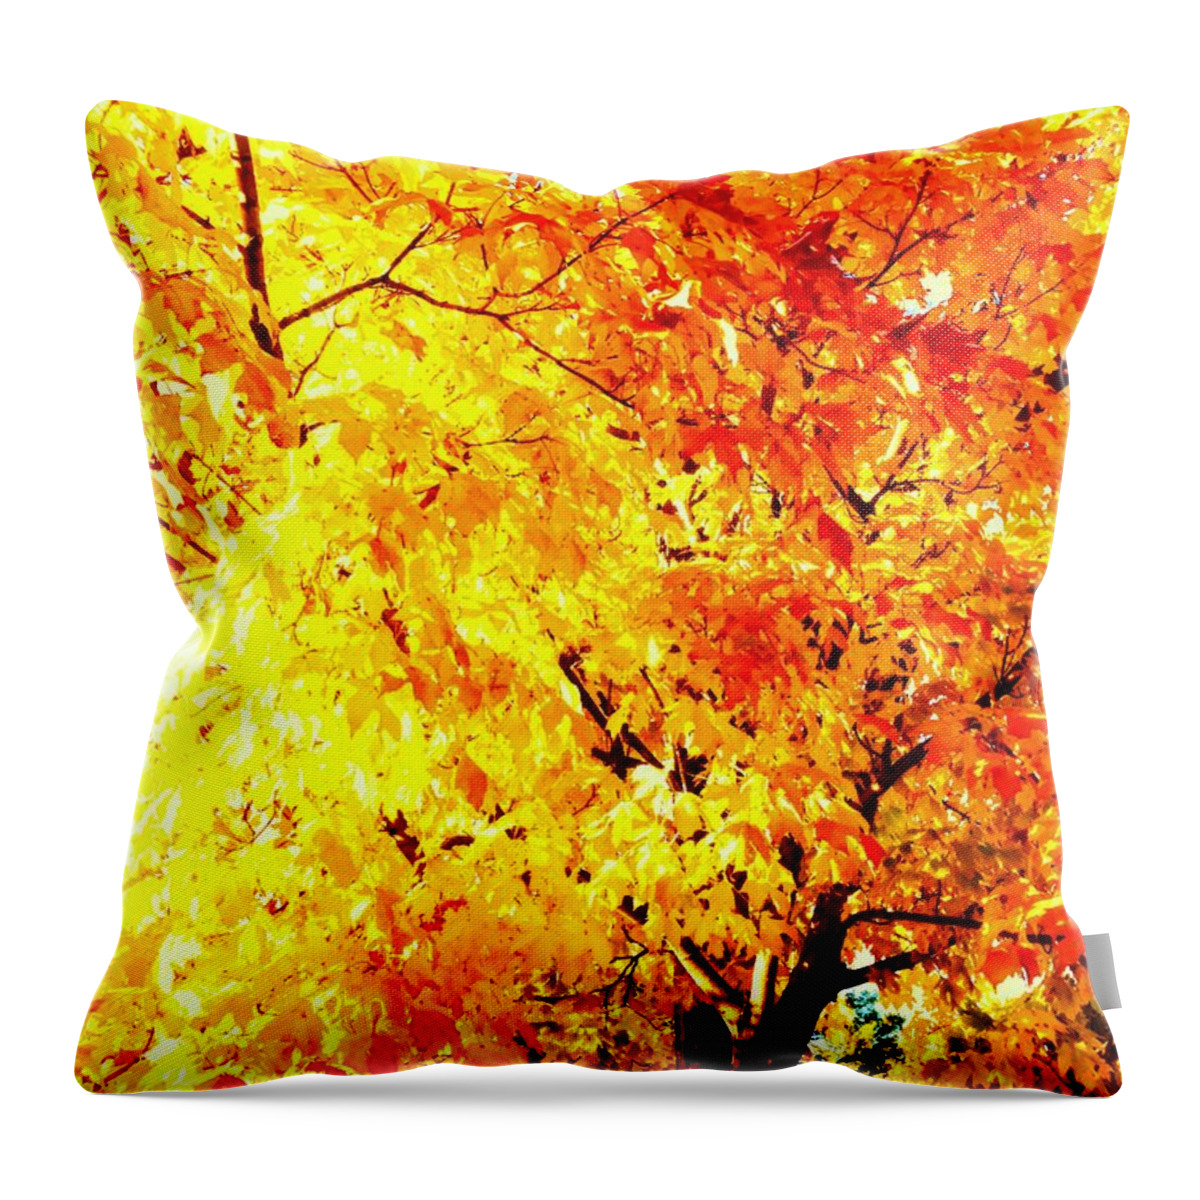 Orange Throw Pillow featuring the photograph Warmth of Fall by Michael Oceanofwisdom Bidwell